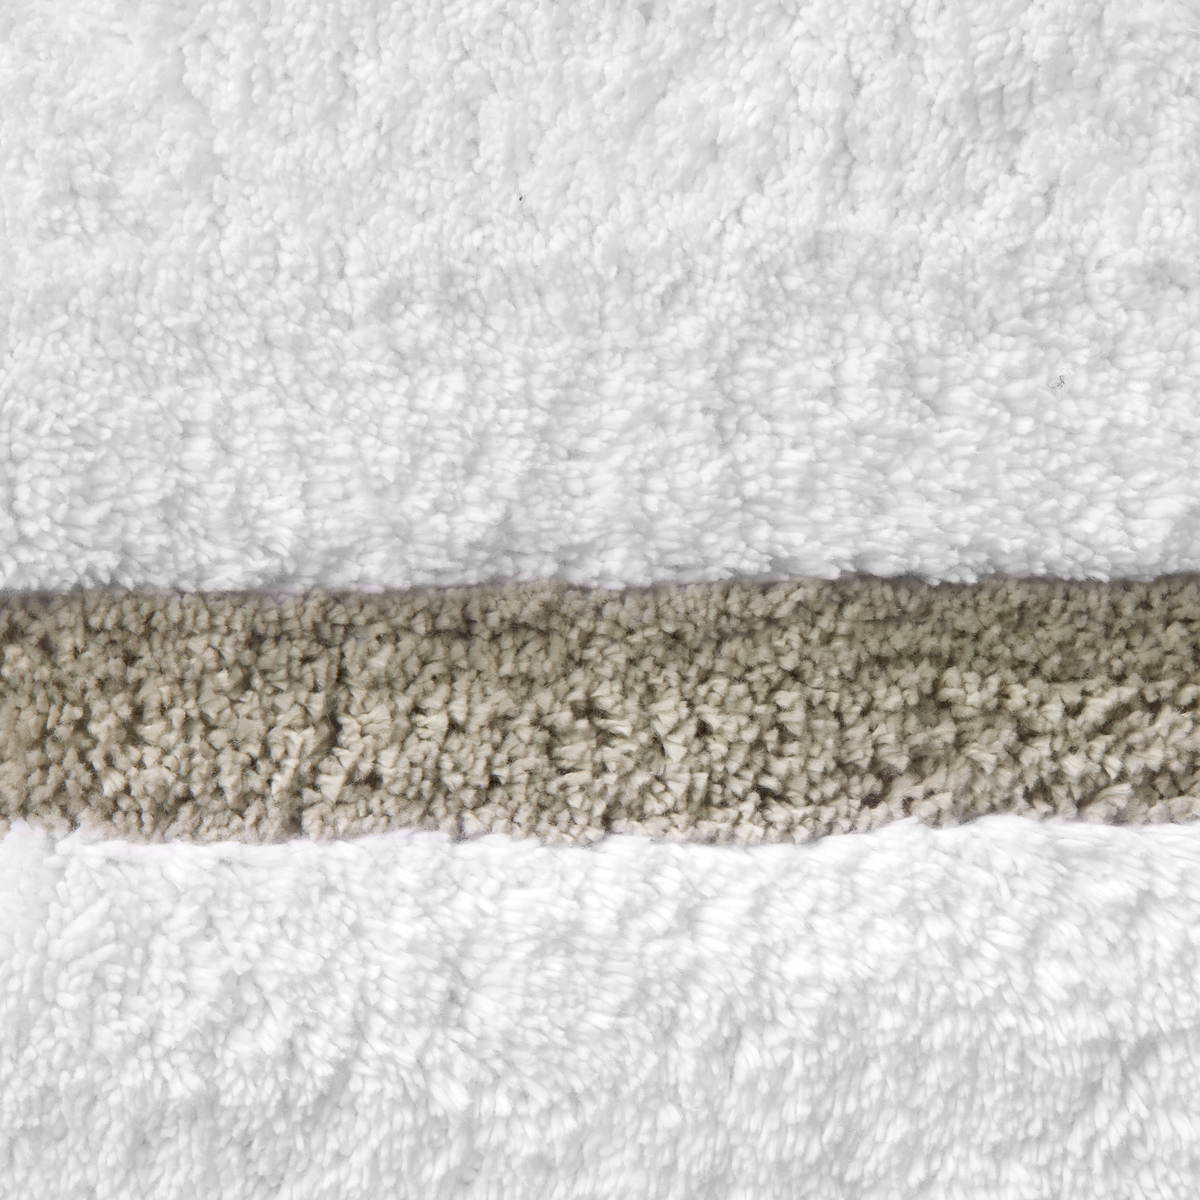 Swatch Sample of Sferra Lindo Bath Rugs in White Grey Color